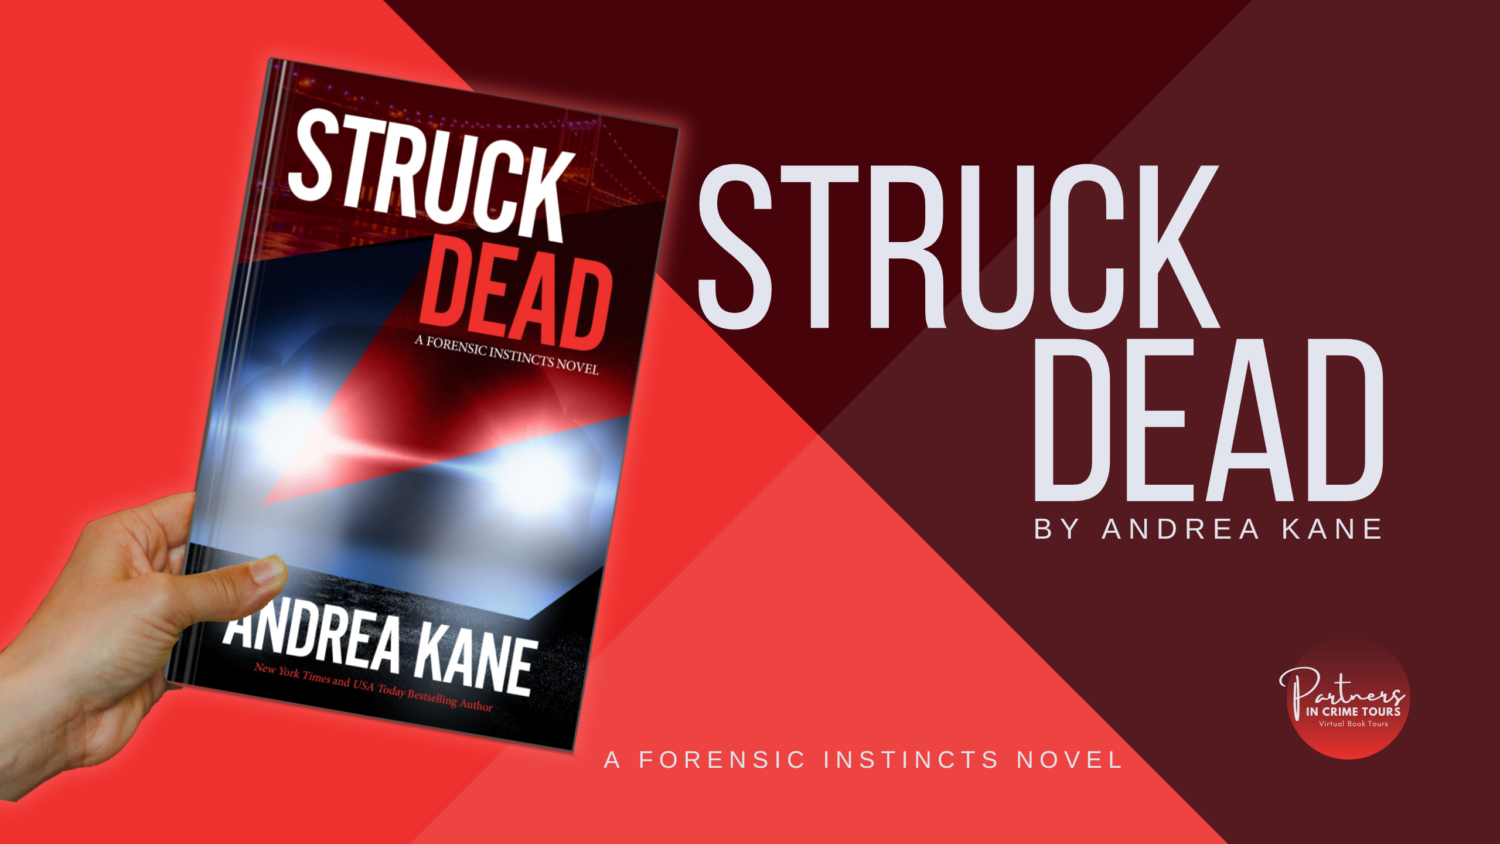 You are currently viewing Struck Dead: A Thriller by Andrea Kane